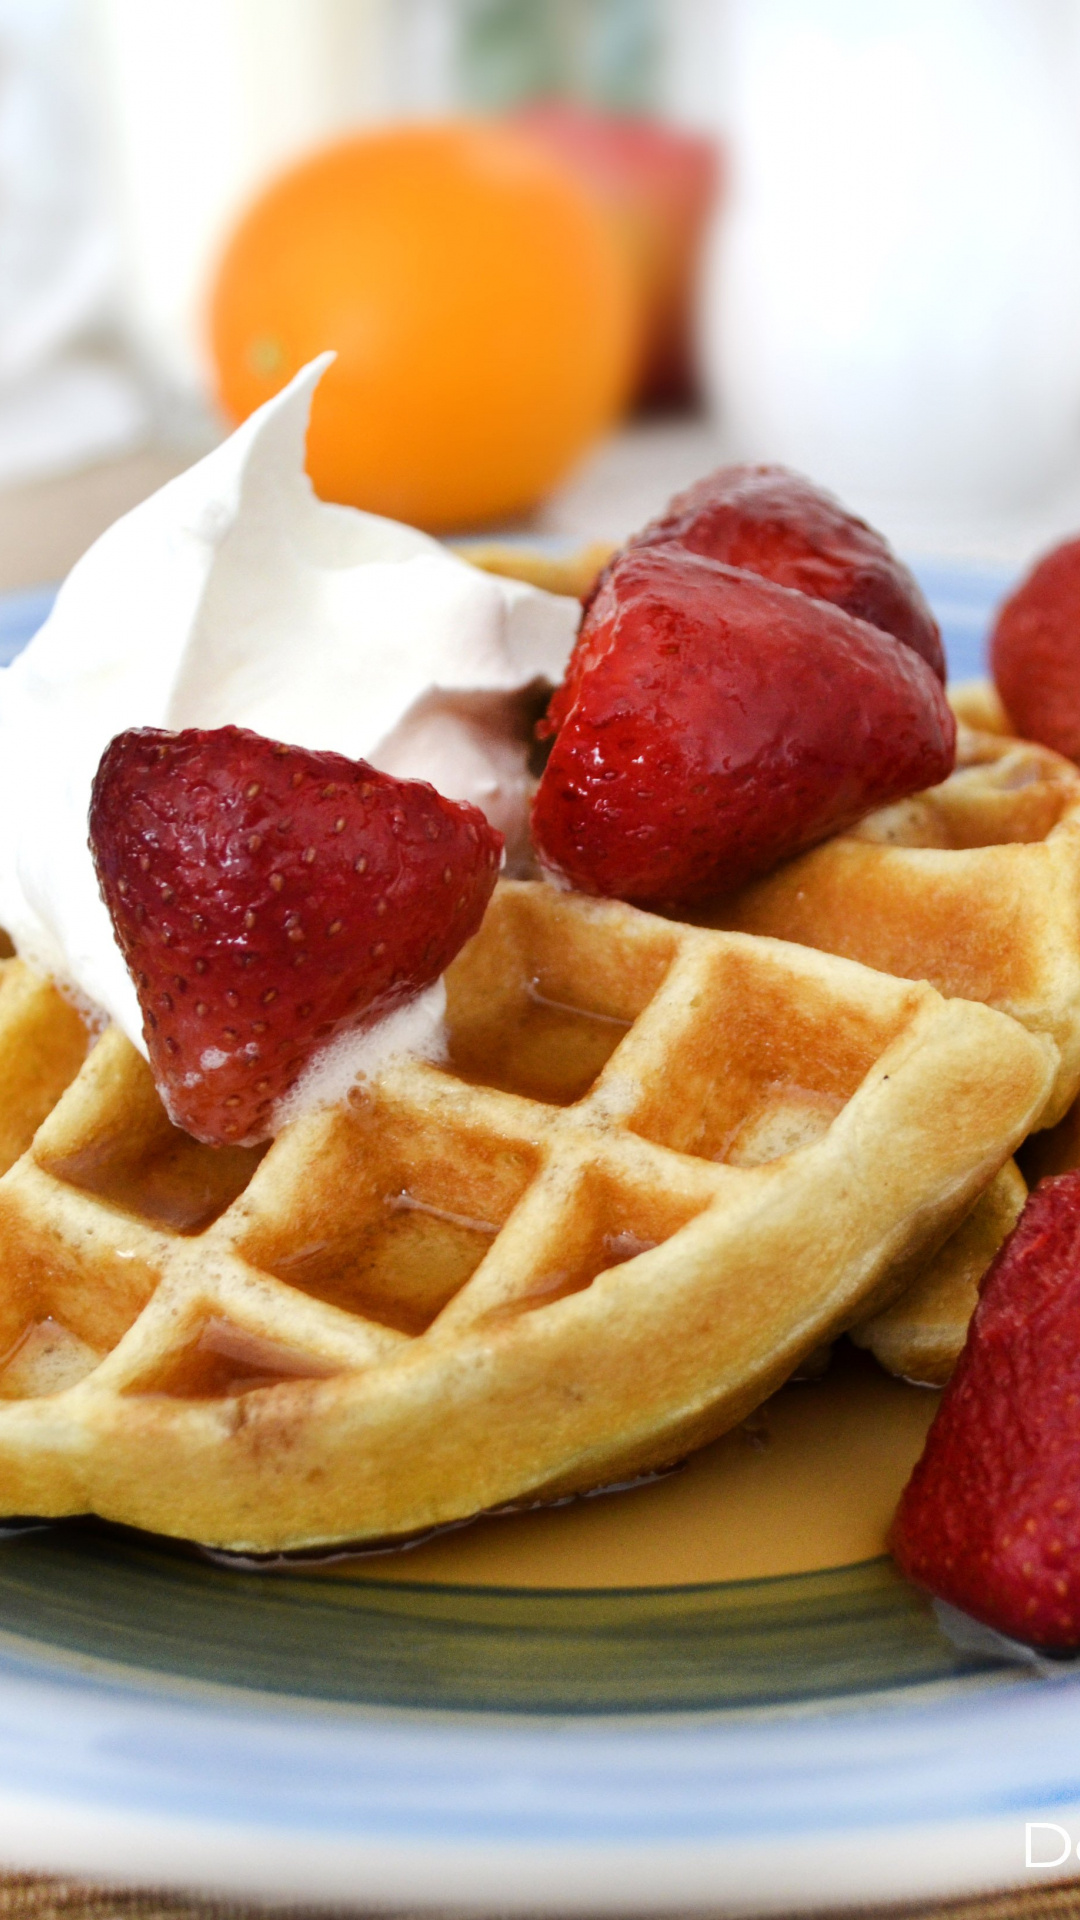 Waffle: A leavened batter or dough cooked between two hot plates. 1080x1920 Full HD Wallpaper.